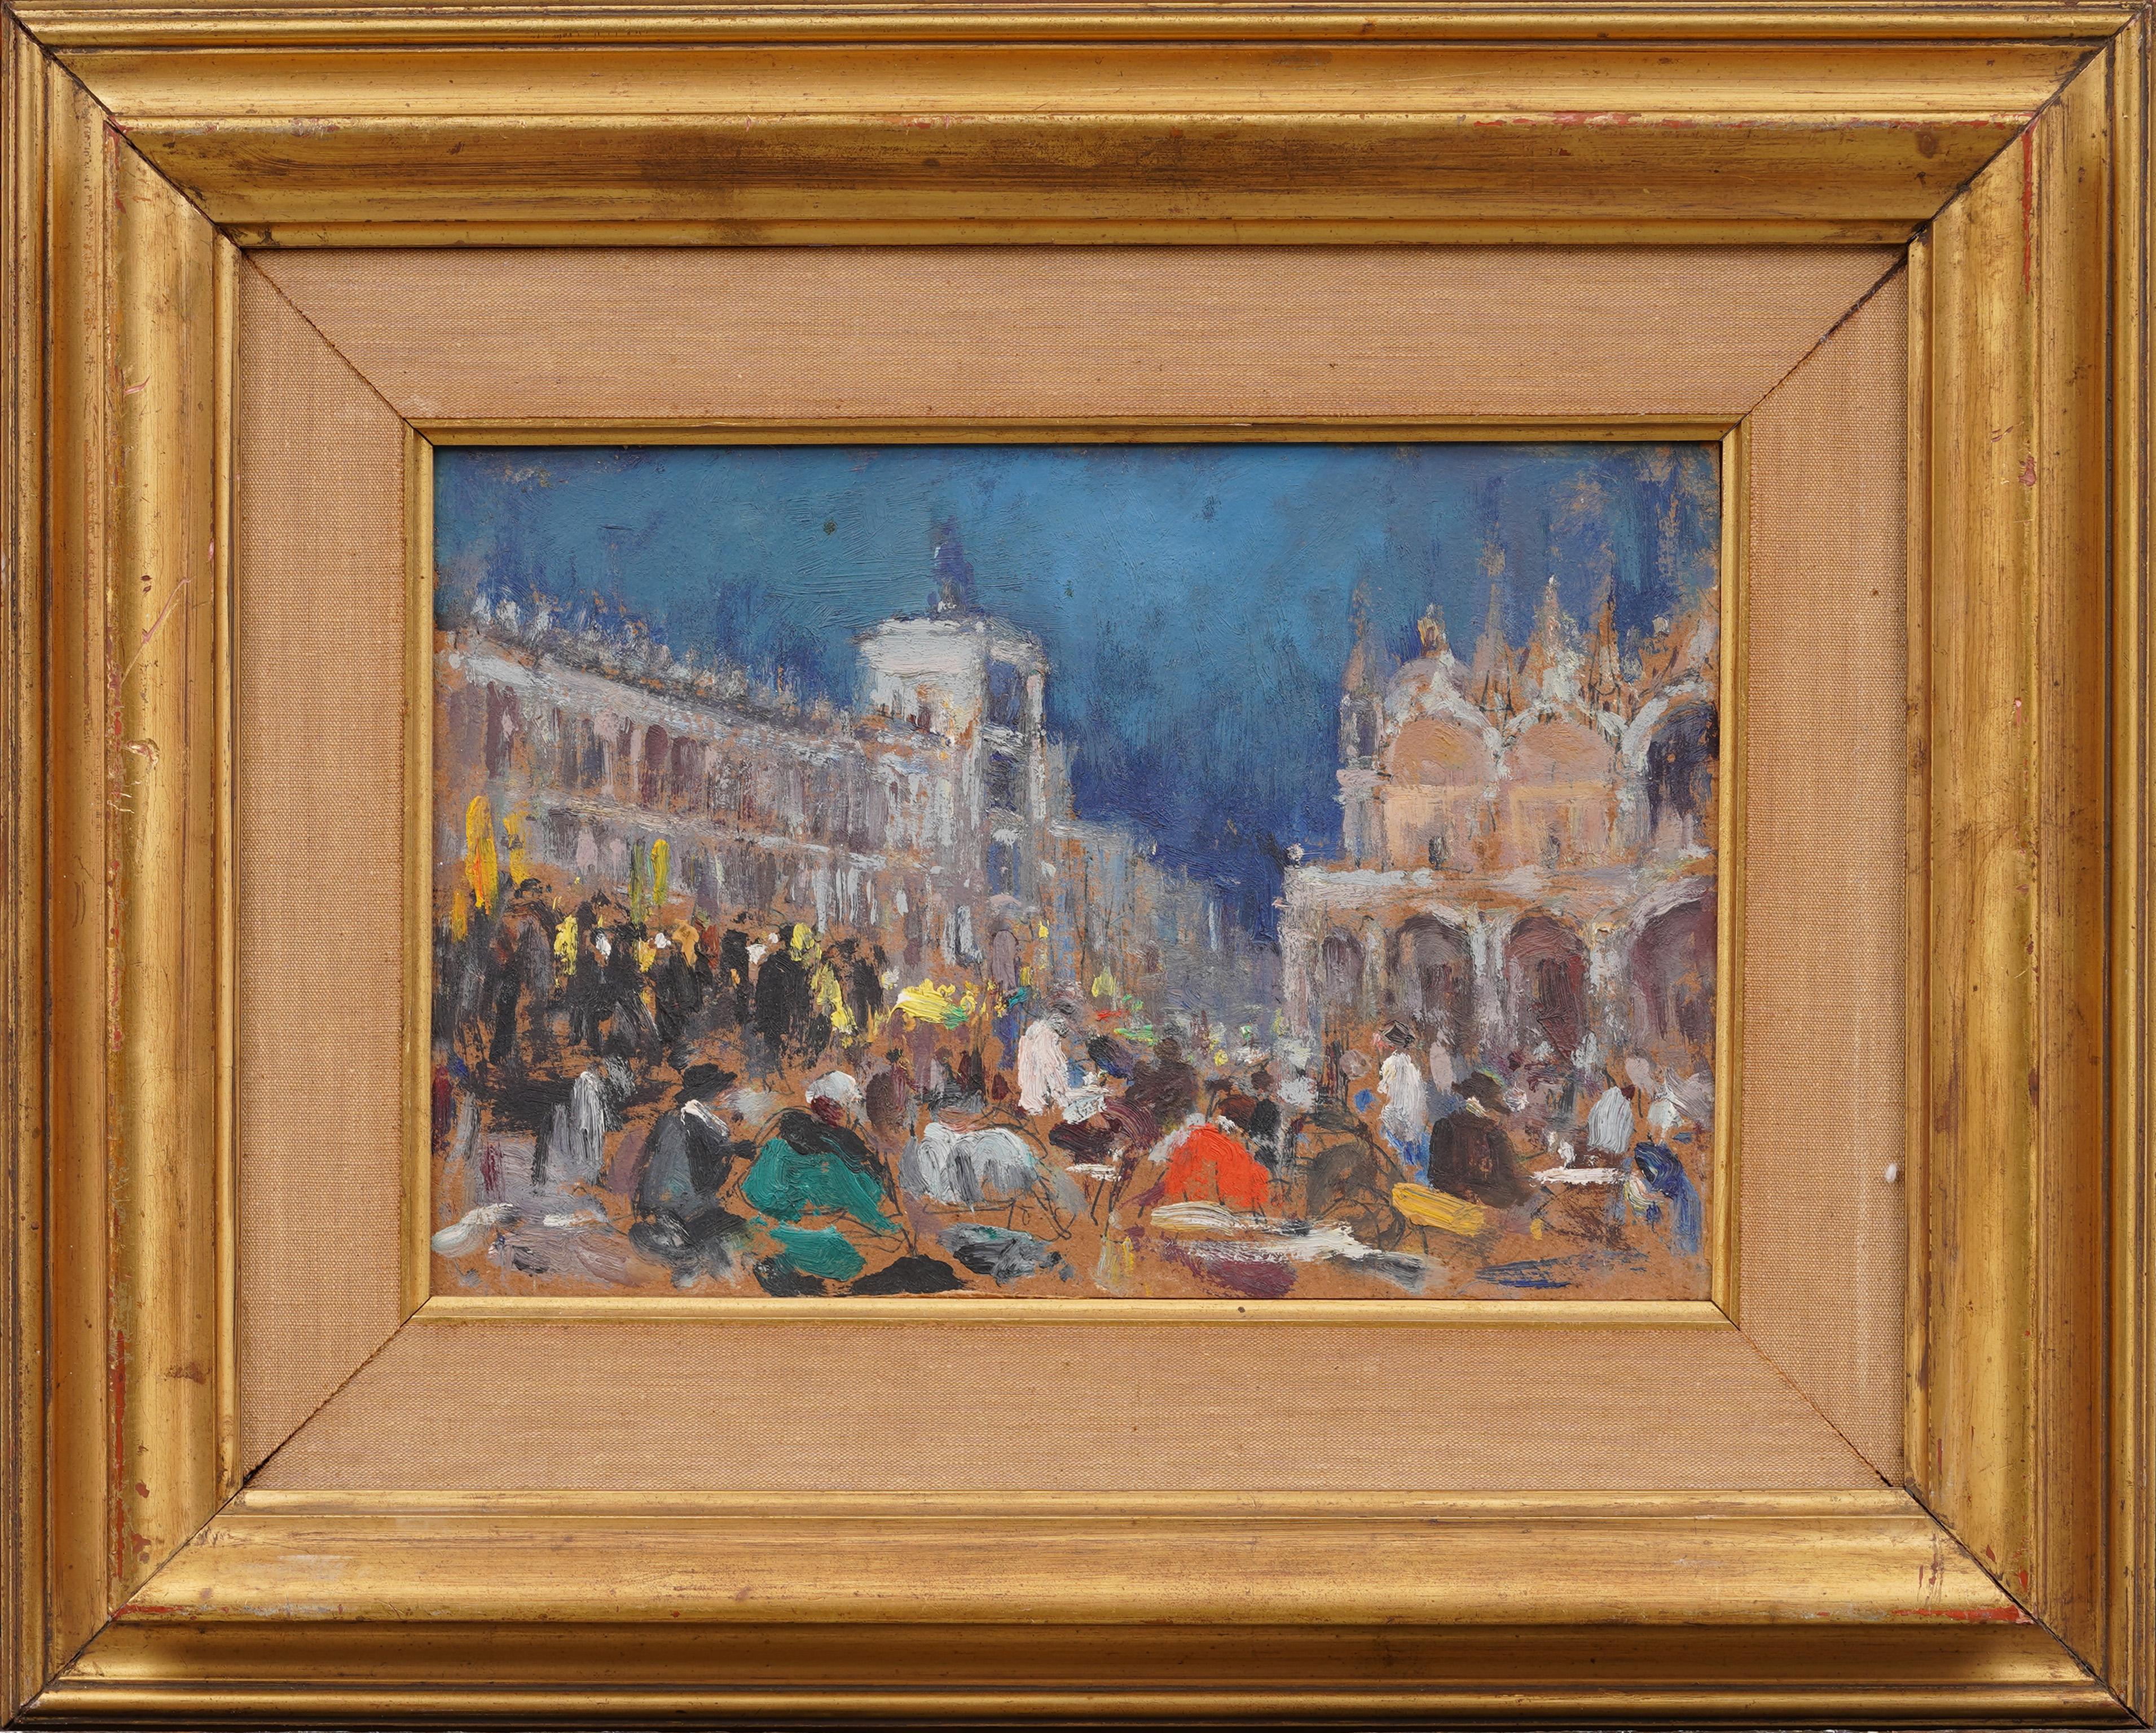 Very impressive early Italian impressionist framed view of St. Mark's in Venice.  Oil on board.  Framed.  No signature found.